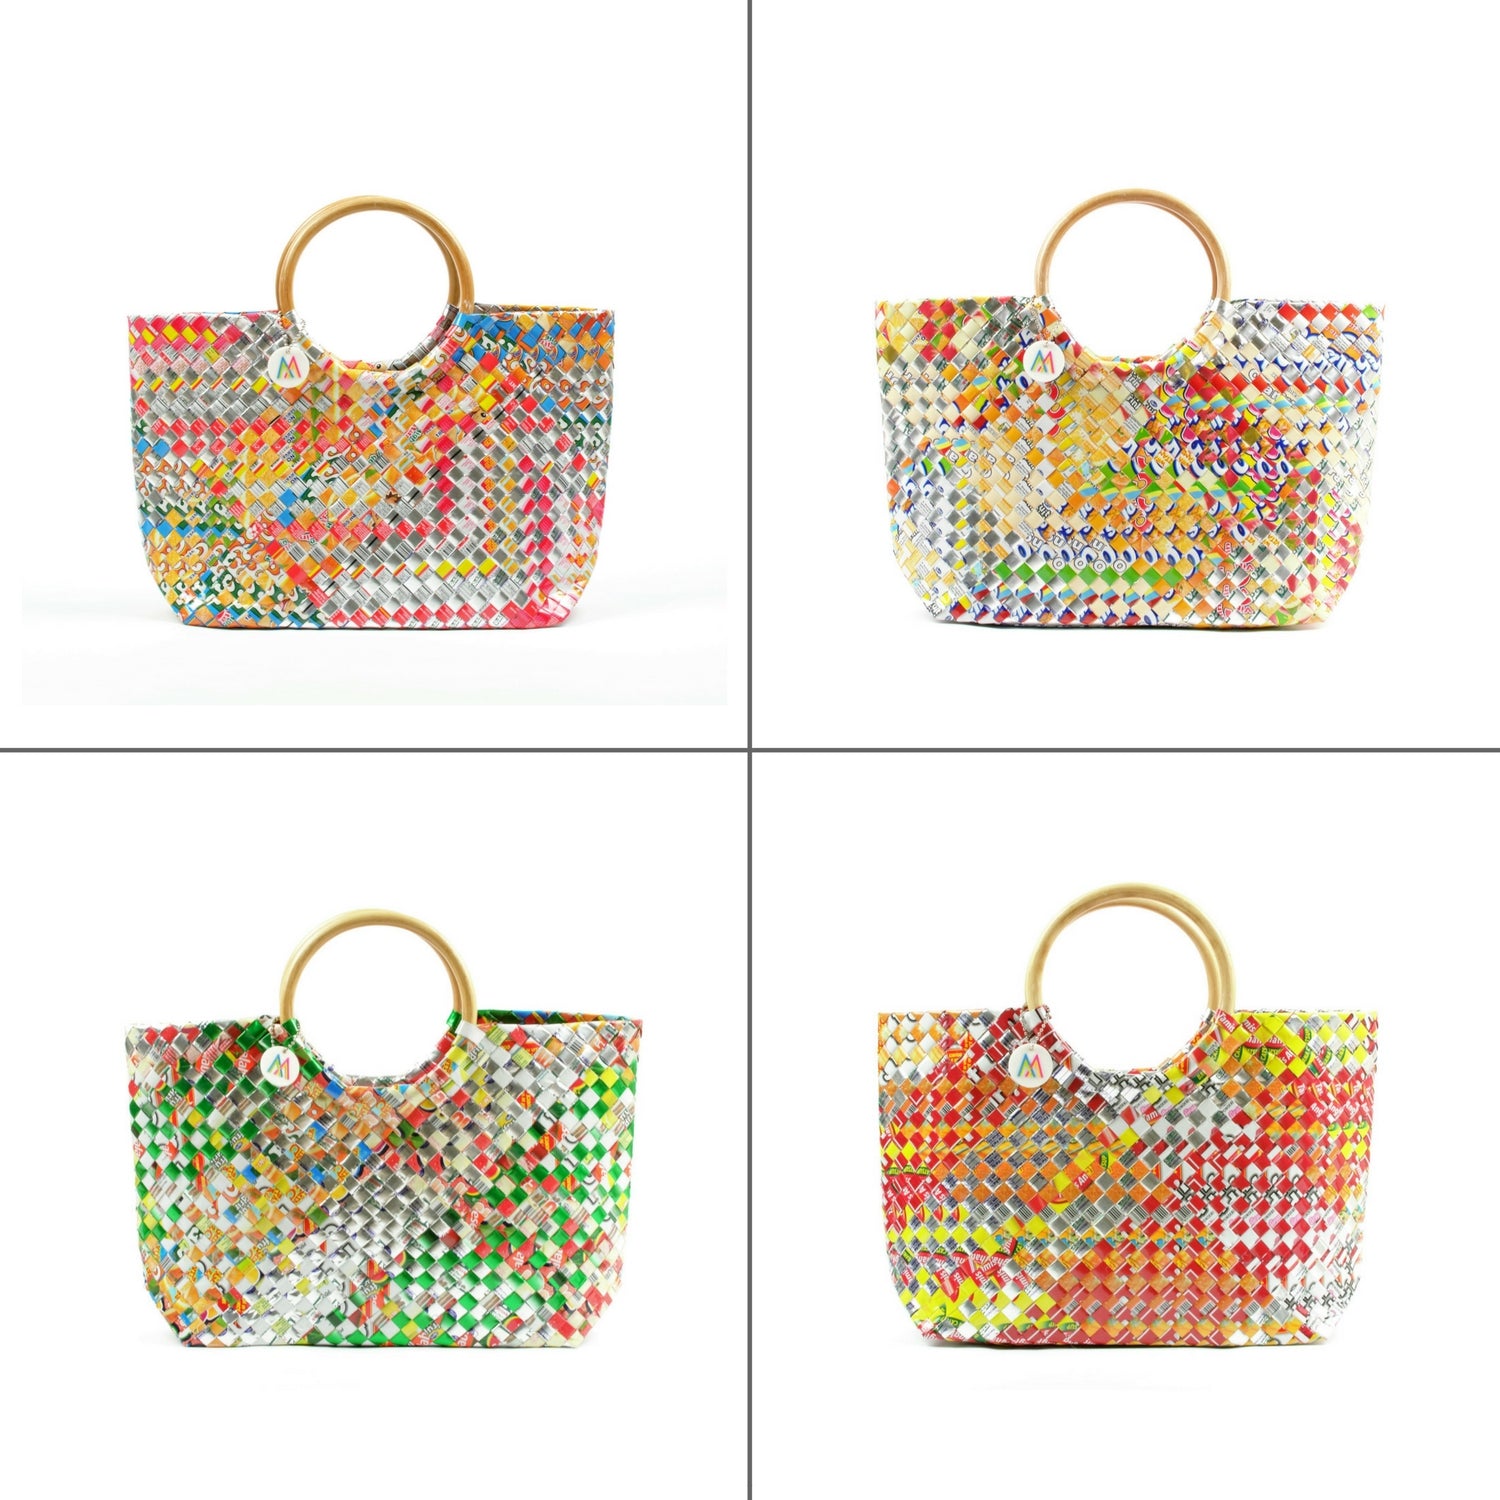 Eco-Friendly, Colorful Handbag from Recycled Materials | Mother Erth